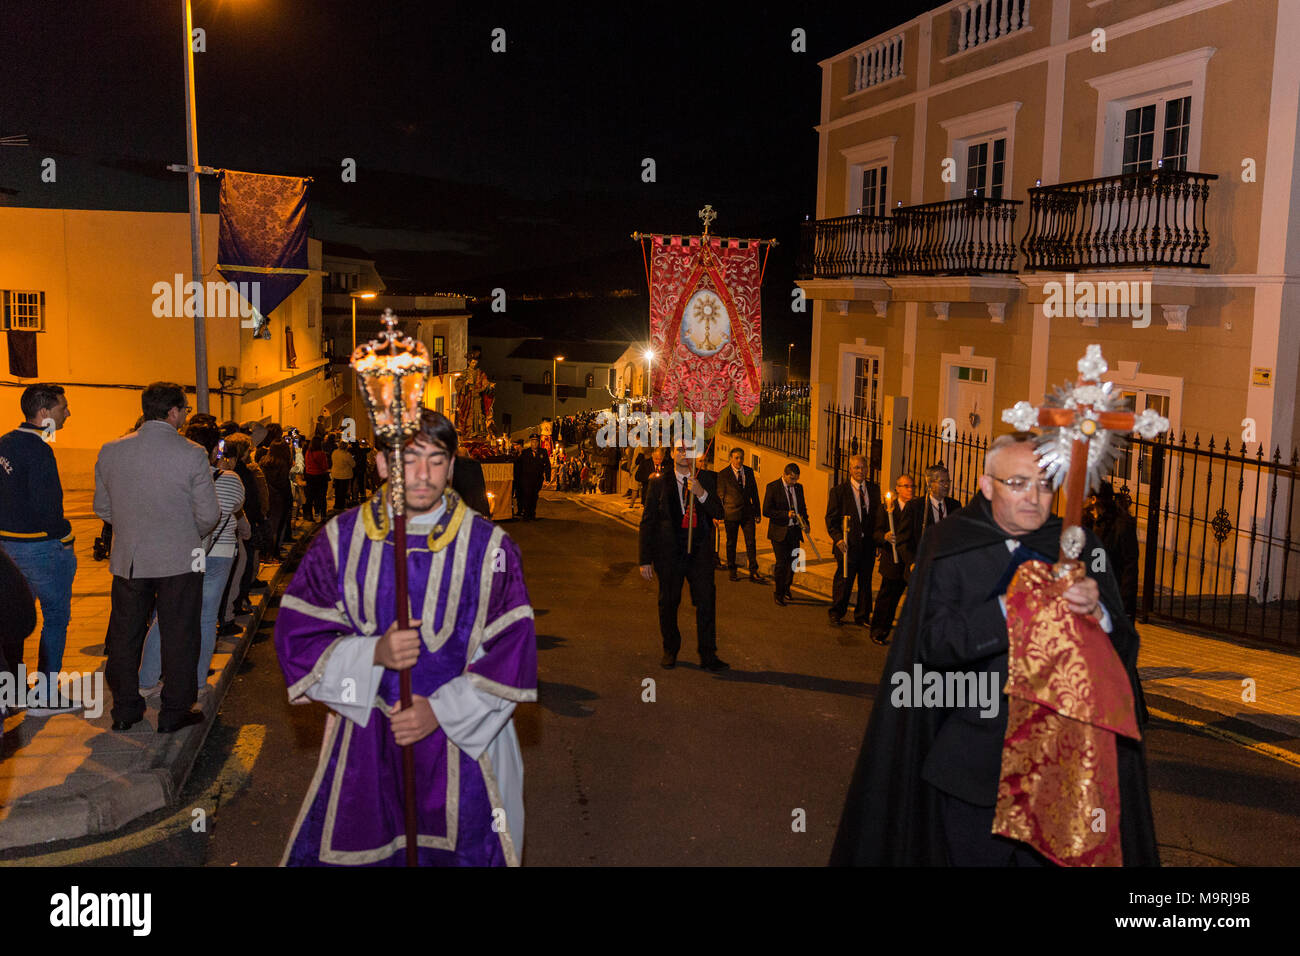 Religious procession in Holy week, through the streets of the old town in Adeje, with lifesize statues of Jesus and the Virgin mary, accompanied by ma Stock Photo